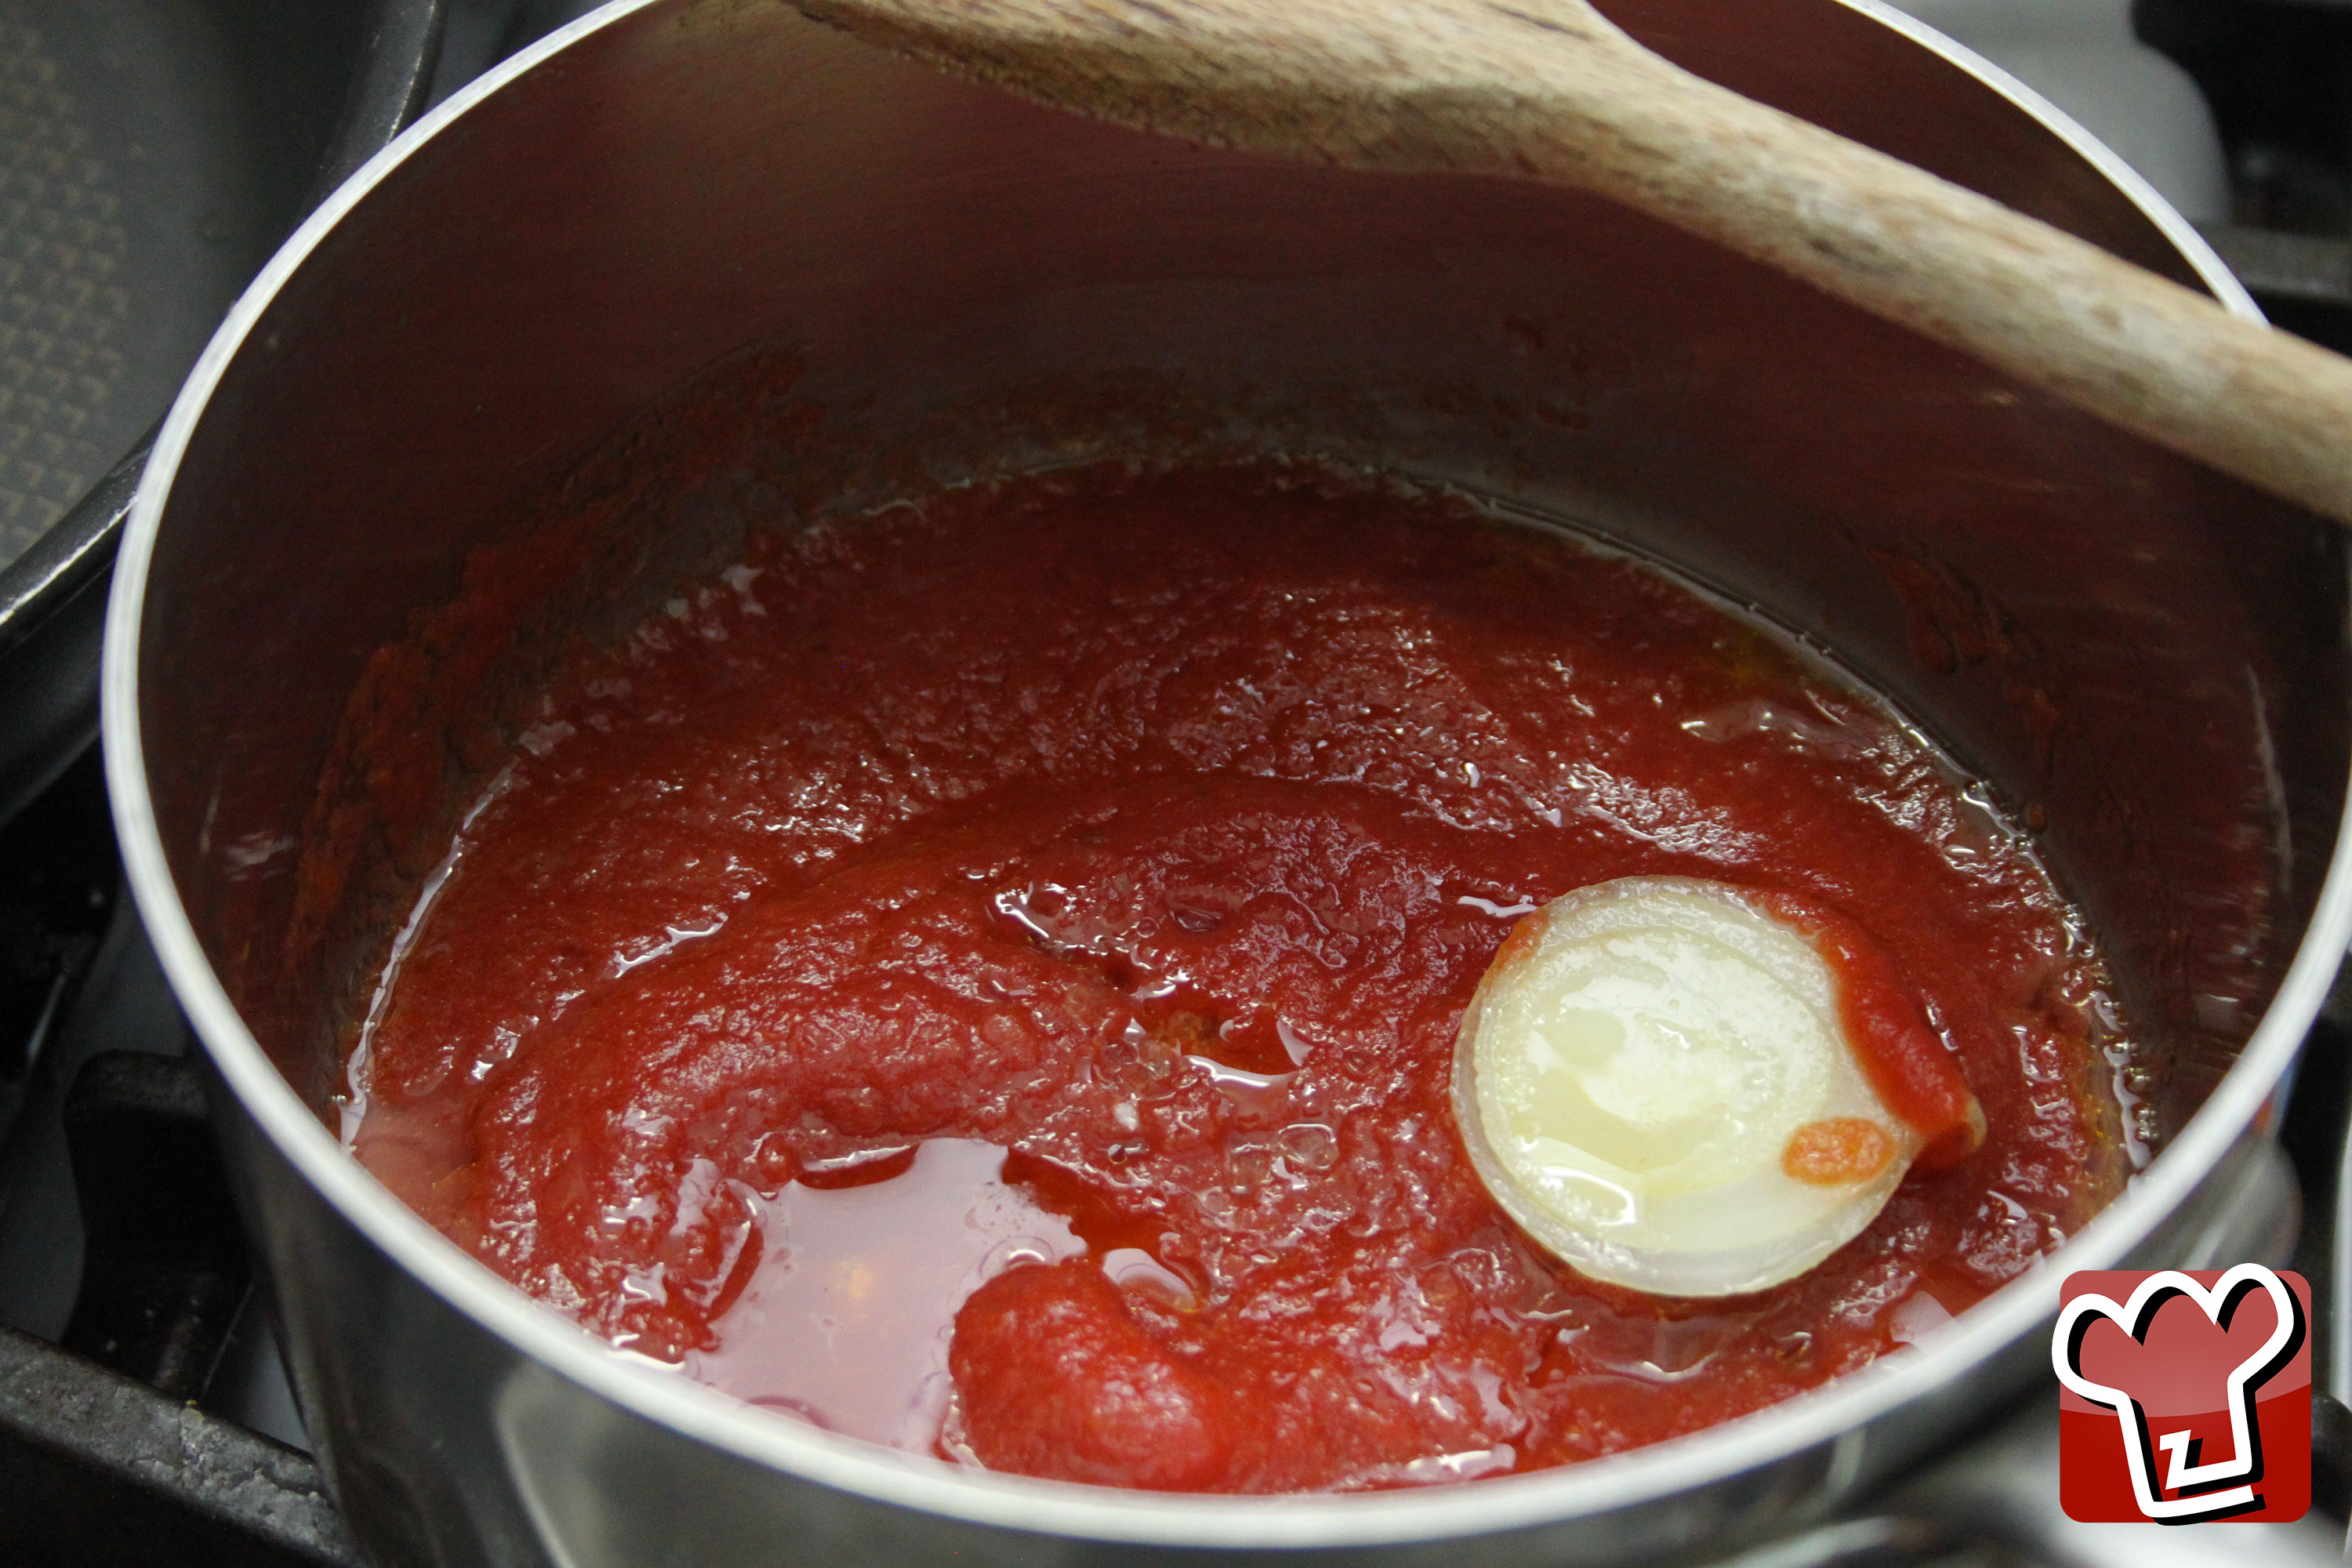 Cook the sauce seasoning with a little onion